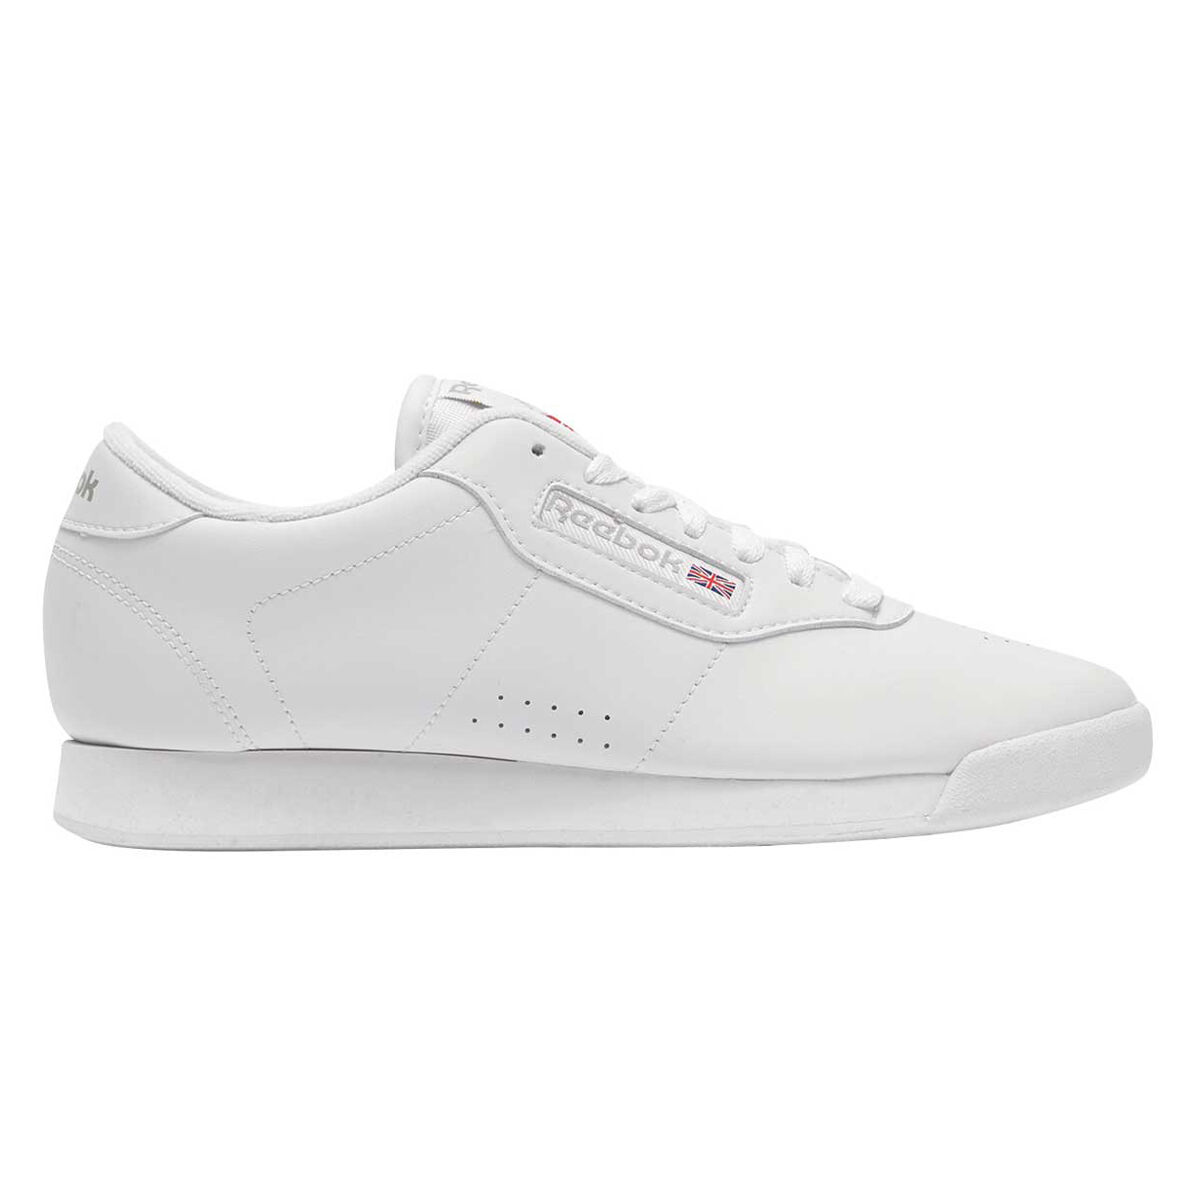 rebook shoes white